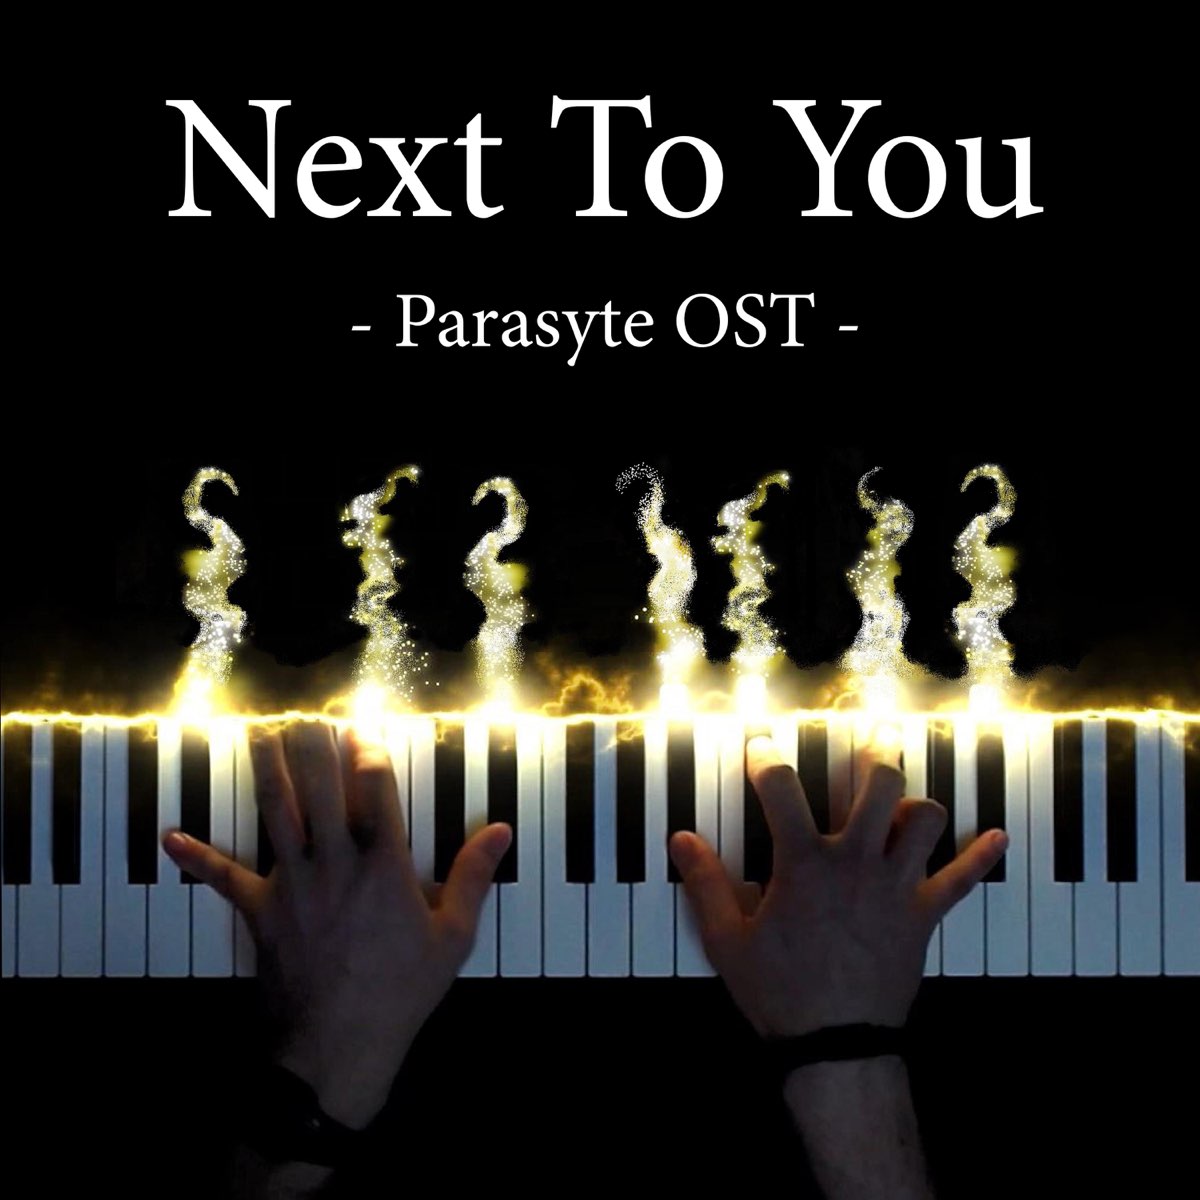 Next To You (From "Parasyte") - Single - Album by PianoDeuss - Apple Music